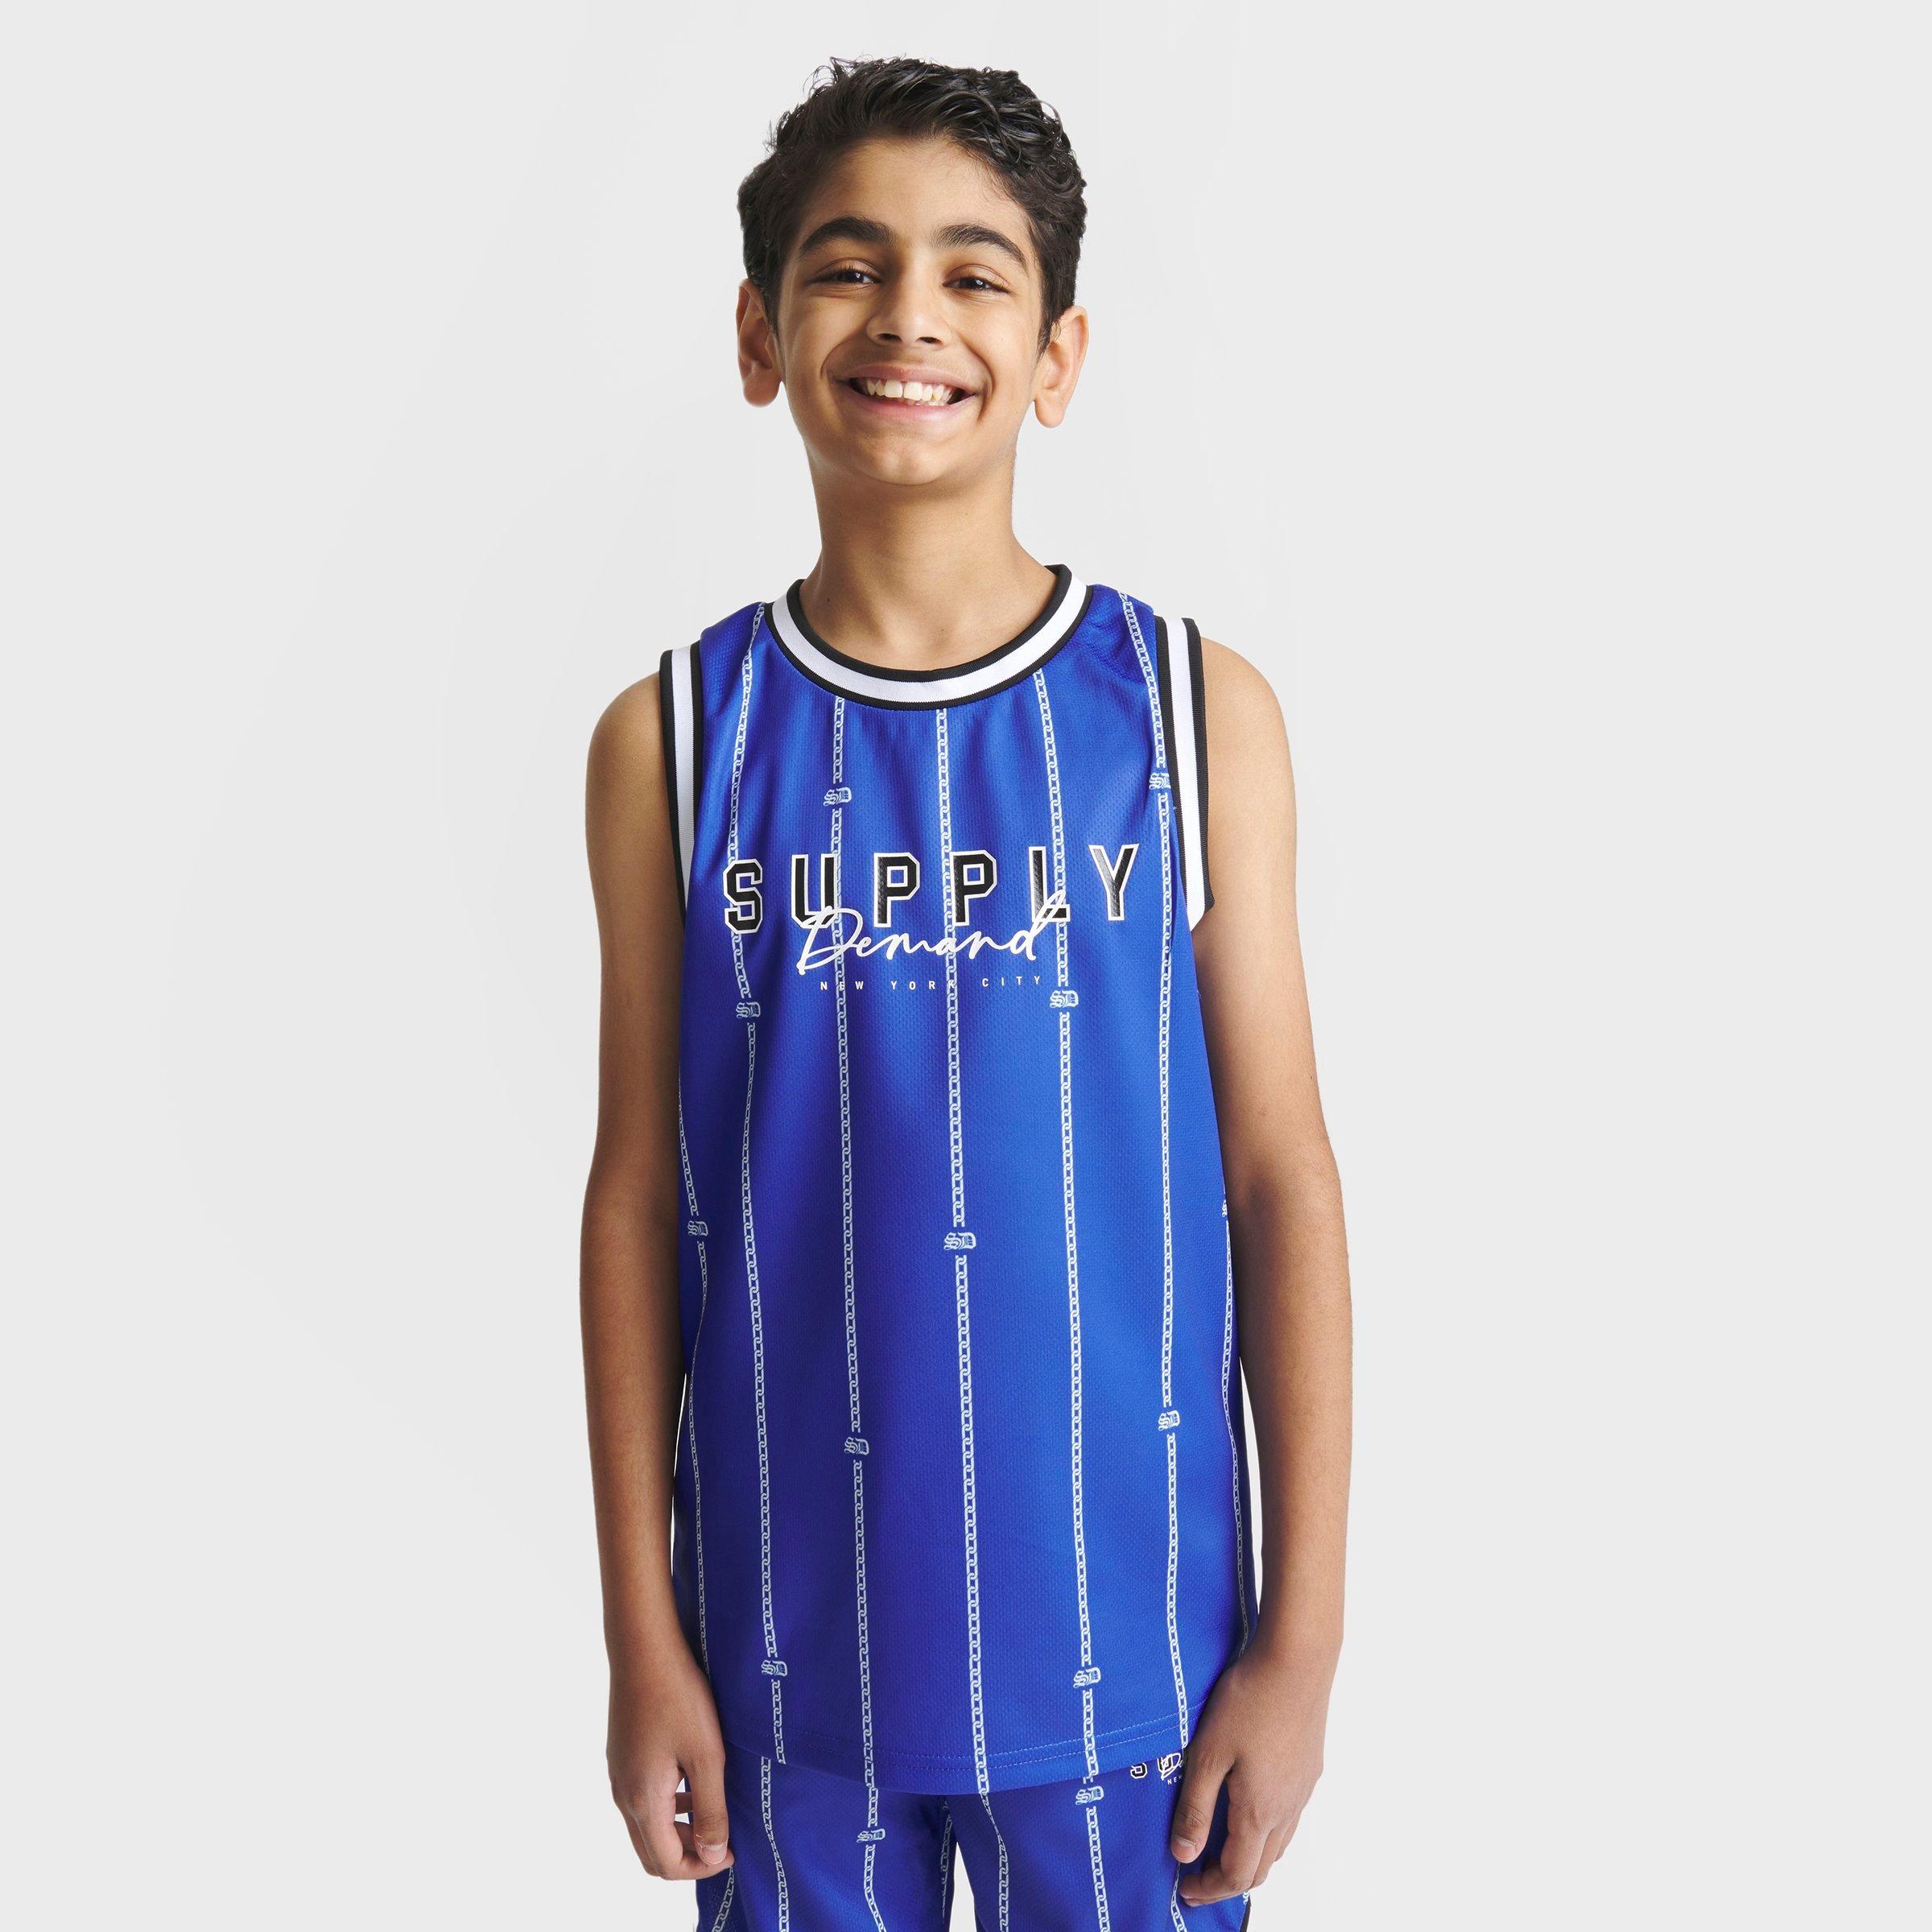 Need some of u vets to check if this is legit. Havent seen quite a lot of  the pinstripe flight 8403 jerseys around : r/basketballjerseys